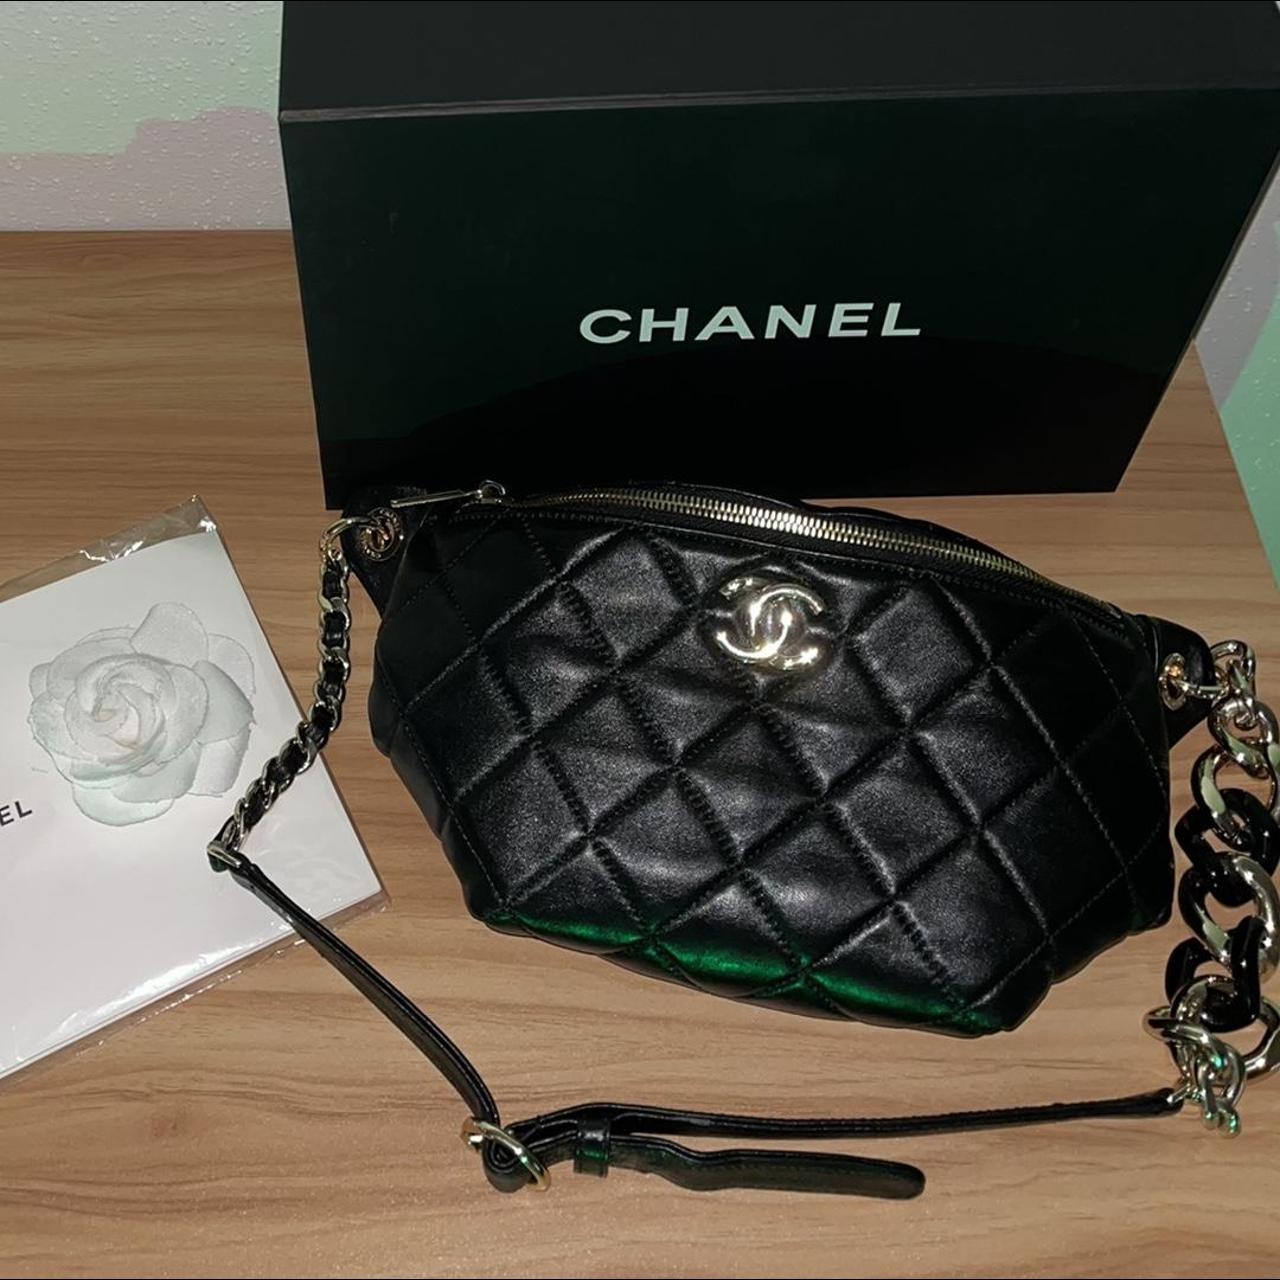 CHANEL FANNY PACK, With booklet, box, dusting bag